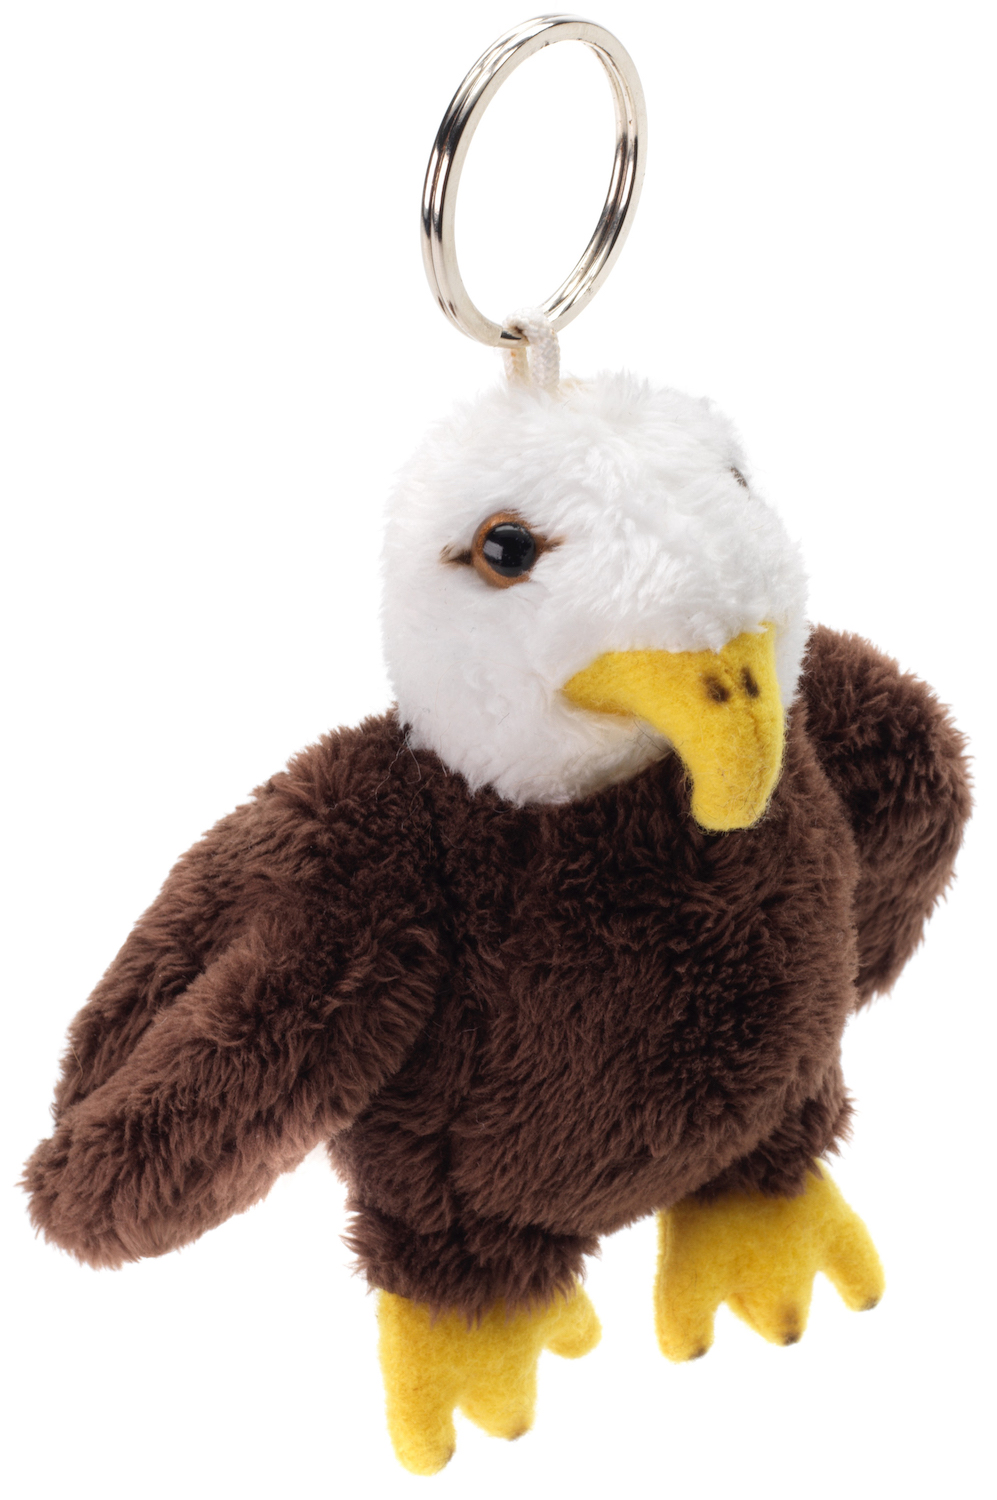 bald eagle with key ring - 11 cm (height)